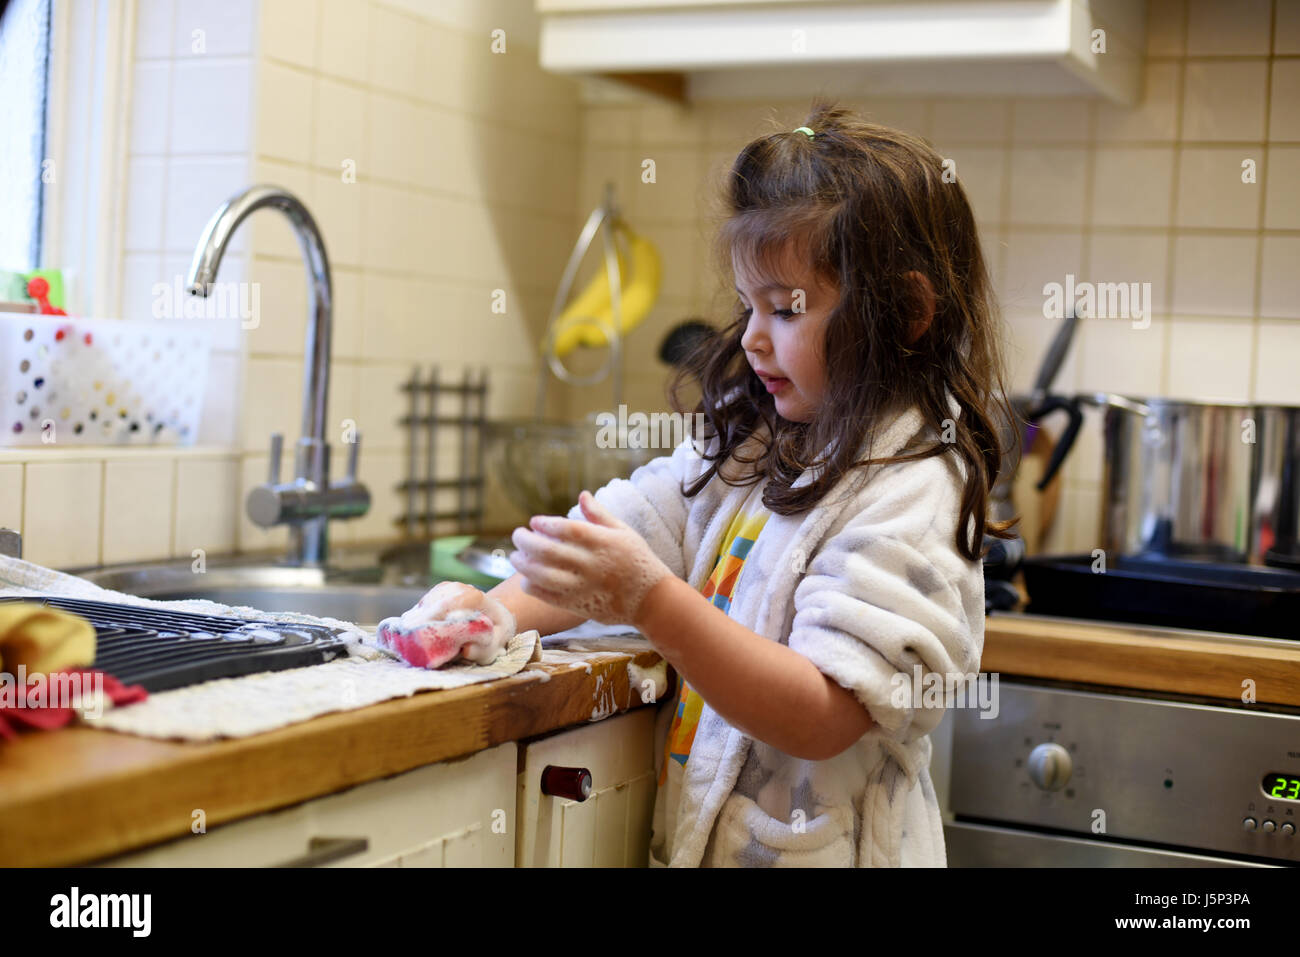 https://c8.alamy.com/comp/J5P3PA/girl-helping-with-housework-washing-up-washing-the-dishes-at-home-J5P3PA.jpg